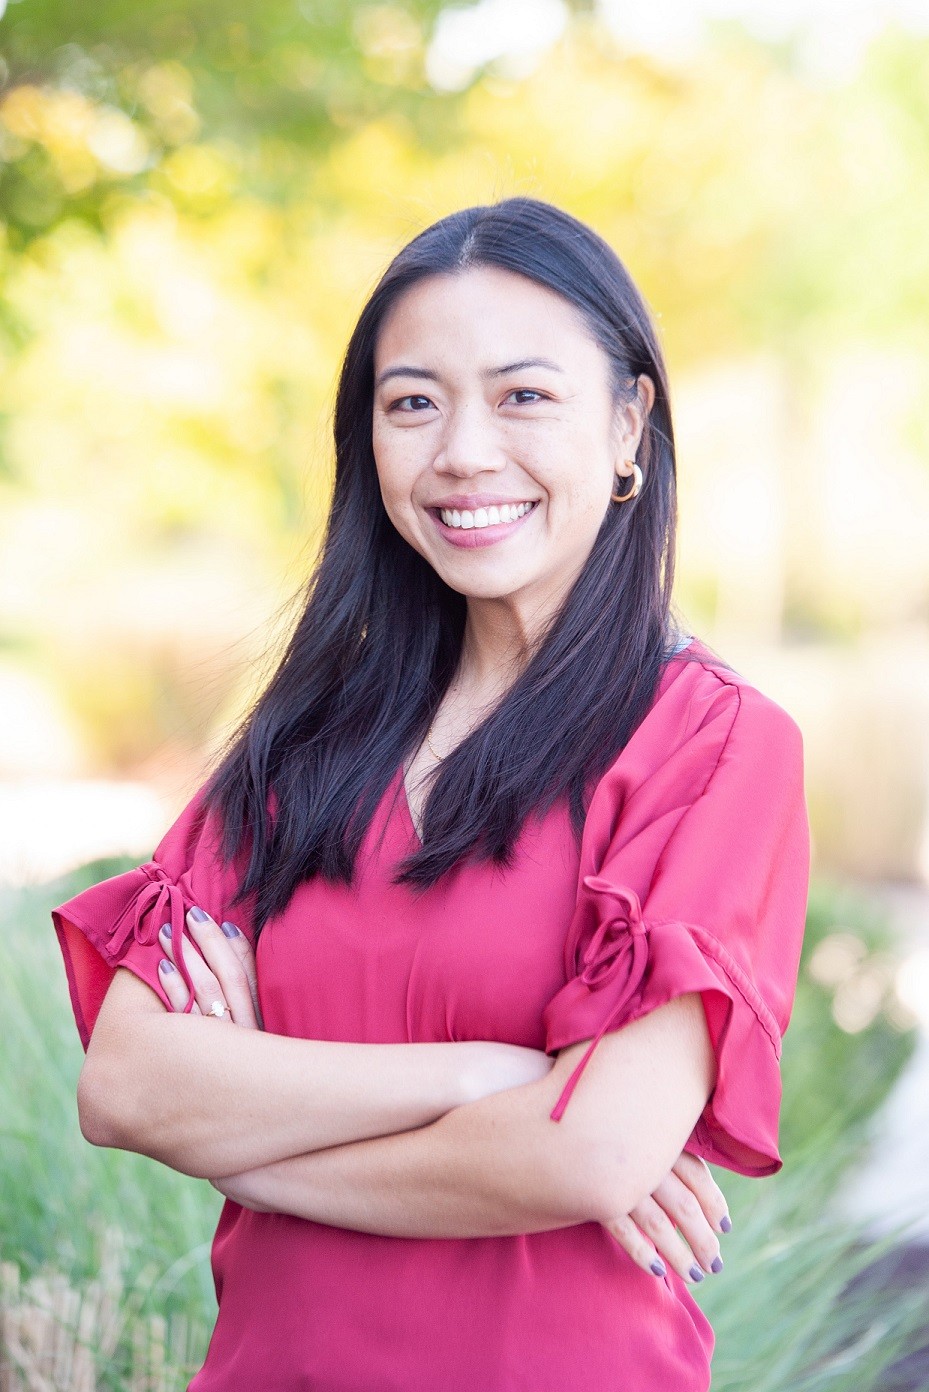 Fauquier Health welcomes new Family Medicine Provider, Dr. Jenna Wong.